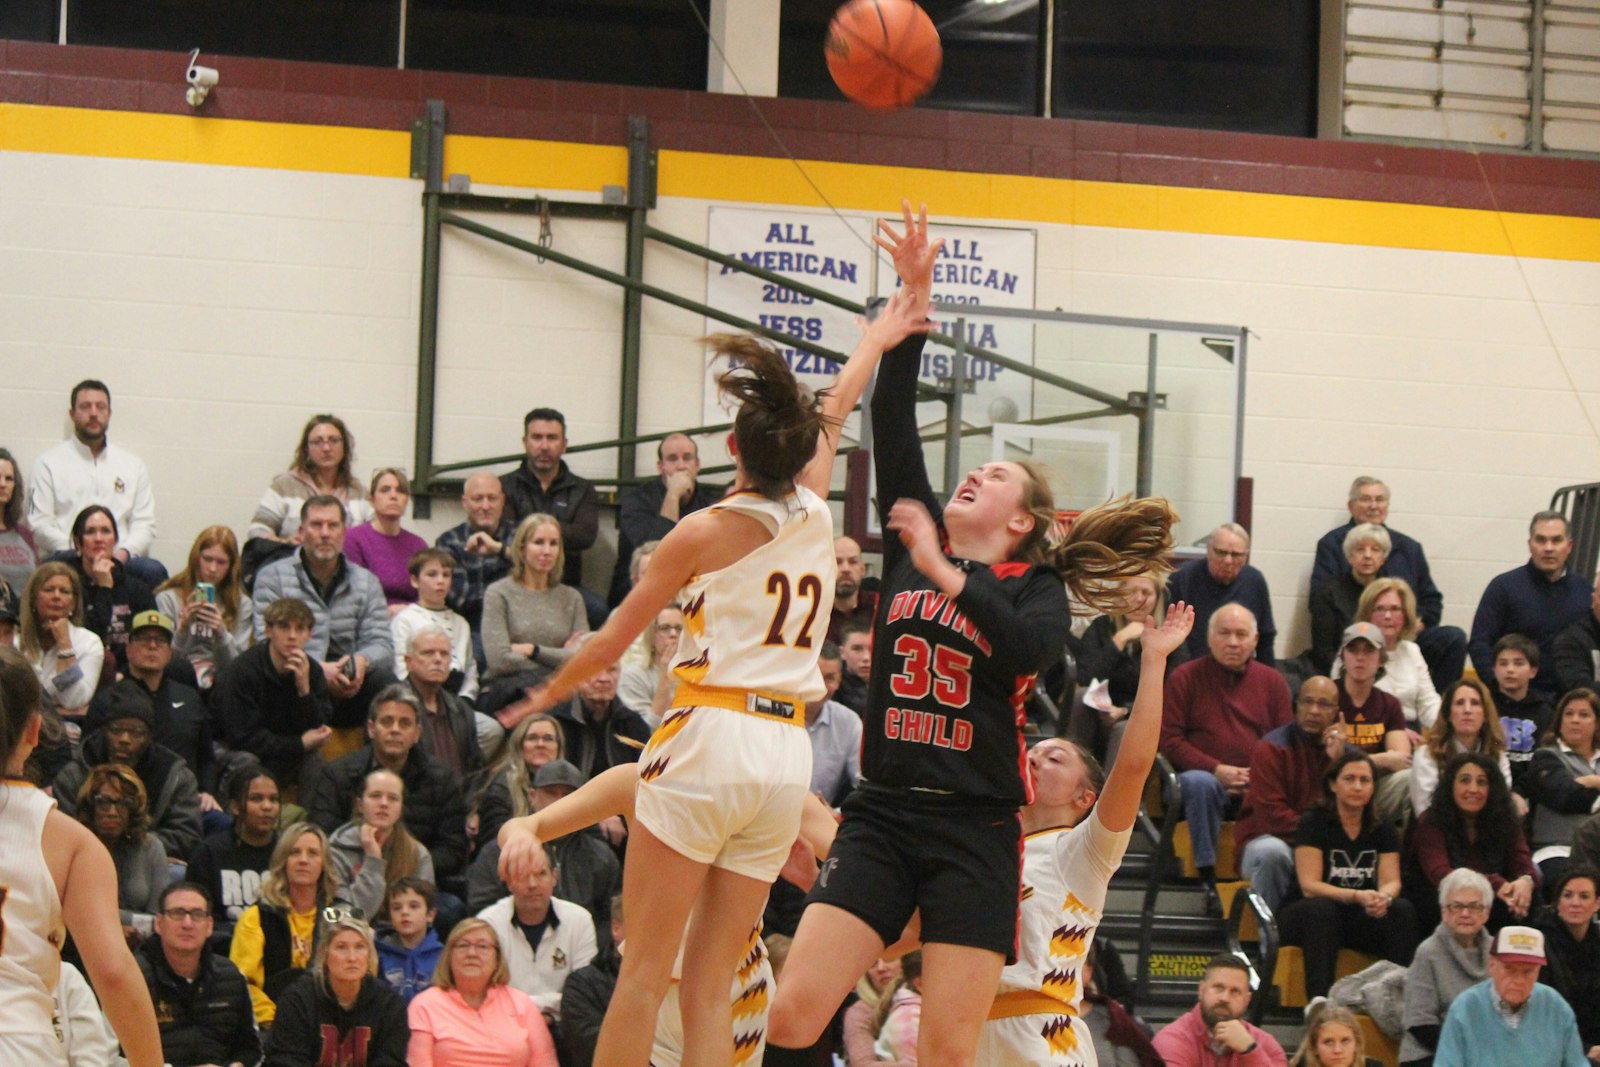 Kennedy Blair launches a shot in the lane which tied the game at 24 midway through the second period.